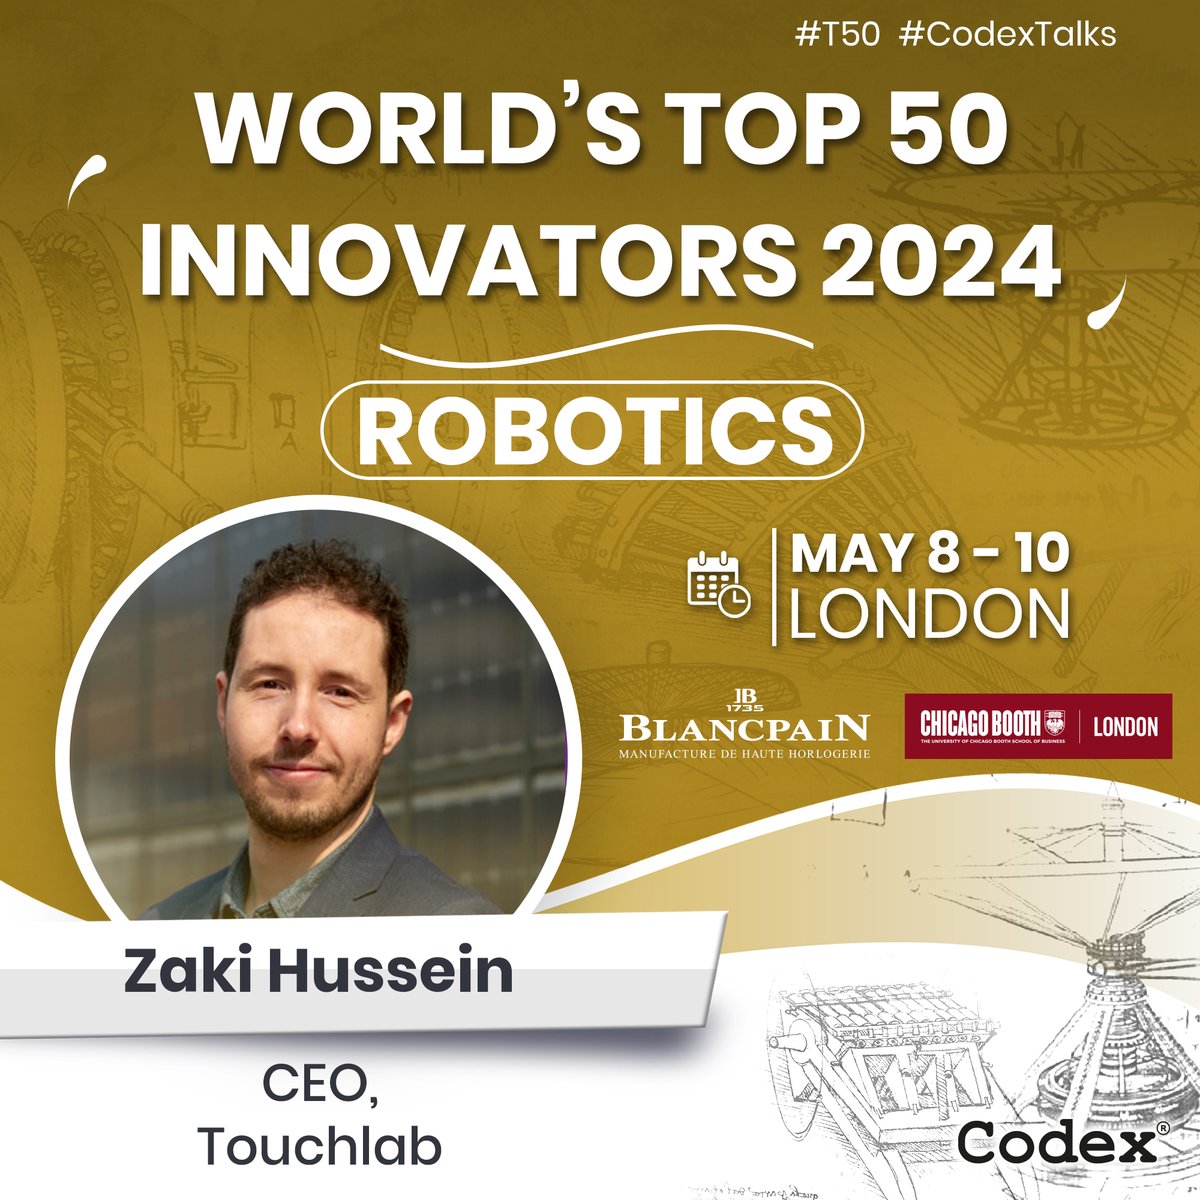 Our CEO @zakiehussein will be giving a #CodexTalk at the World's Top 50 Innovators 2024 (@codexworld) at Chicago Booth, London in the #Robotics session scheduled for Wednesday 8th May from 13:15 until 14:45. We hope to see you all there!